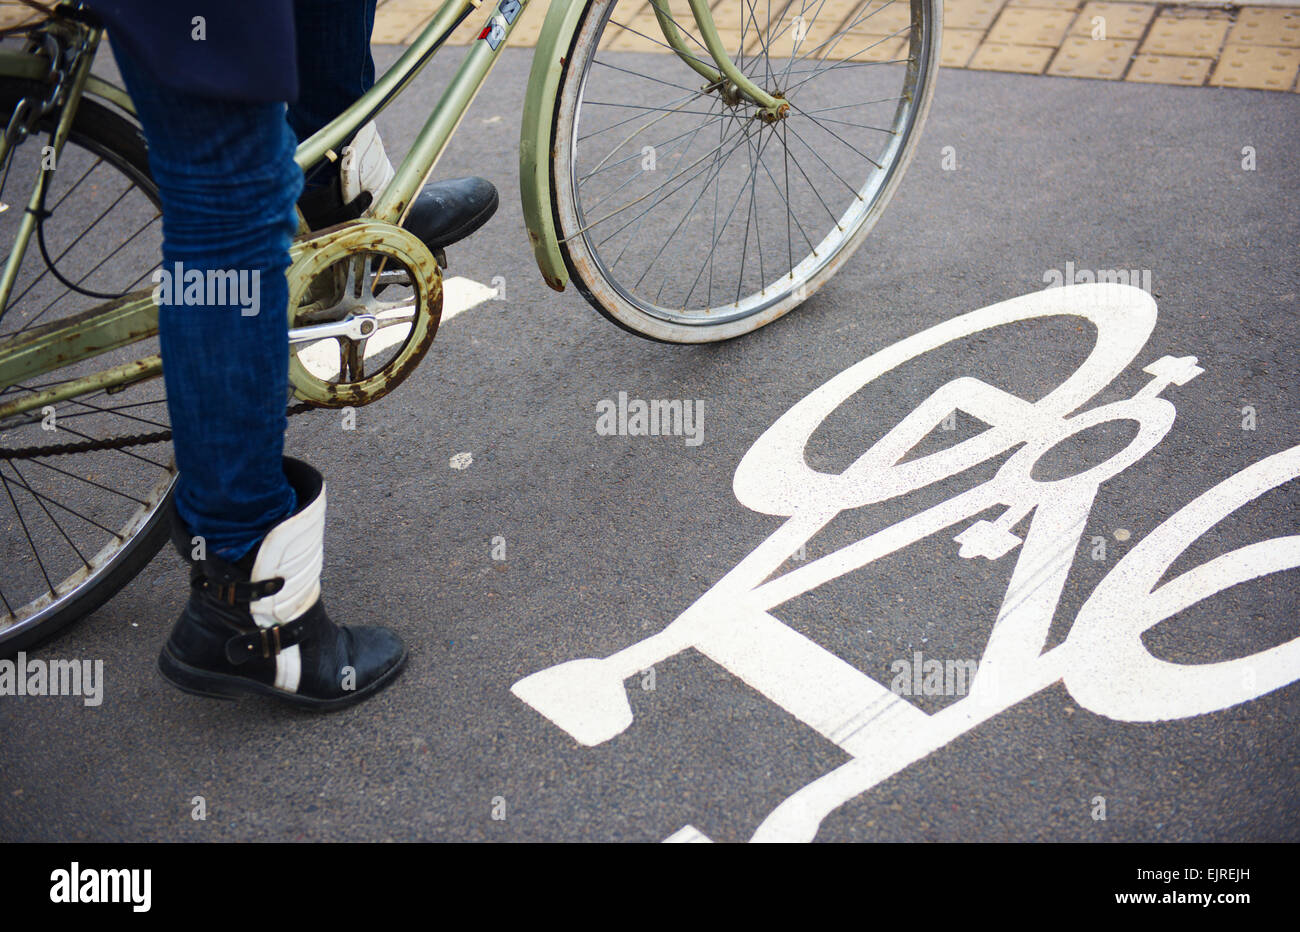 Cyclist stopped at junction with cycling symbol on road Stock Photo